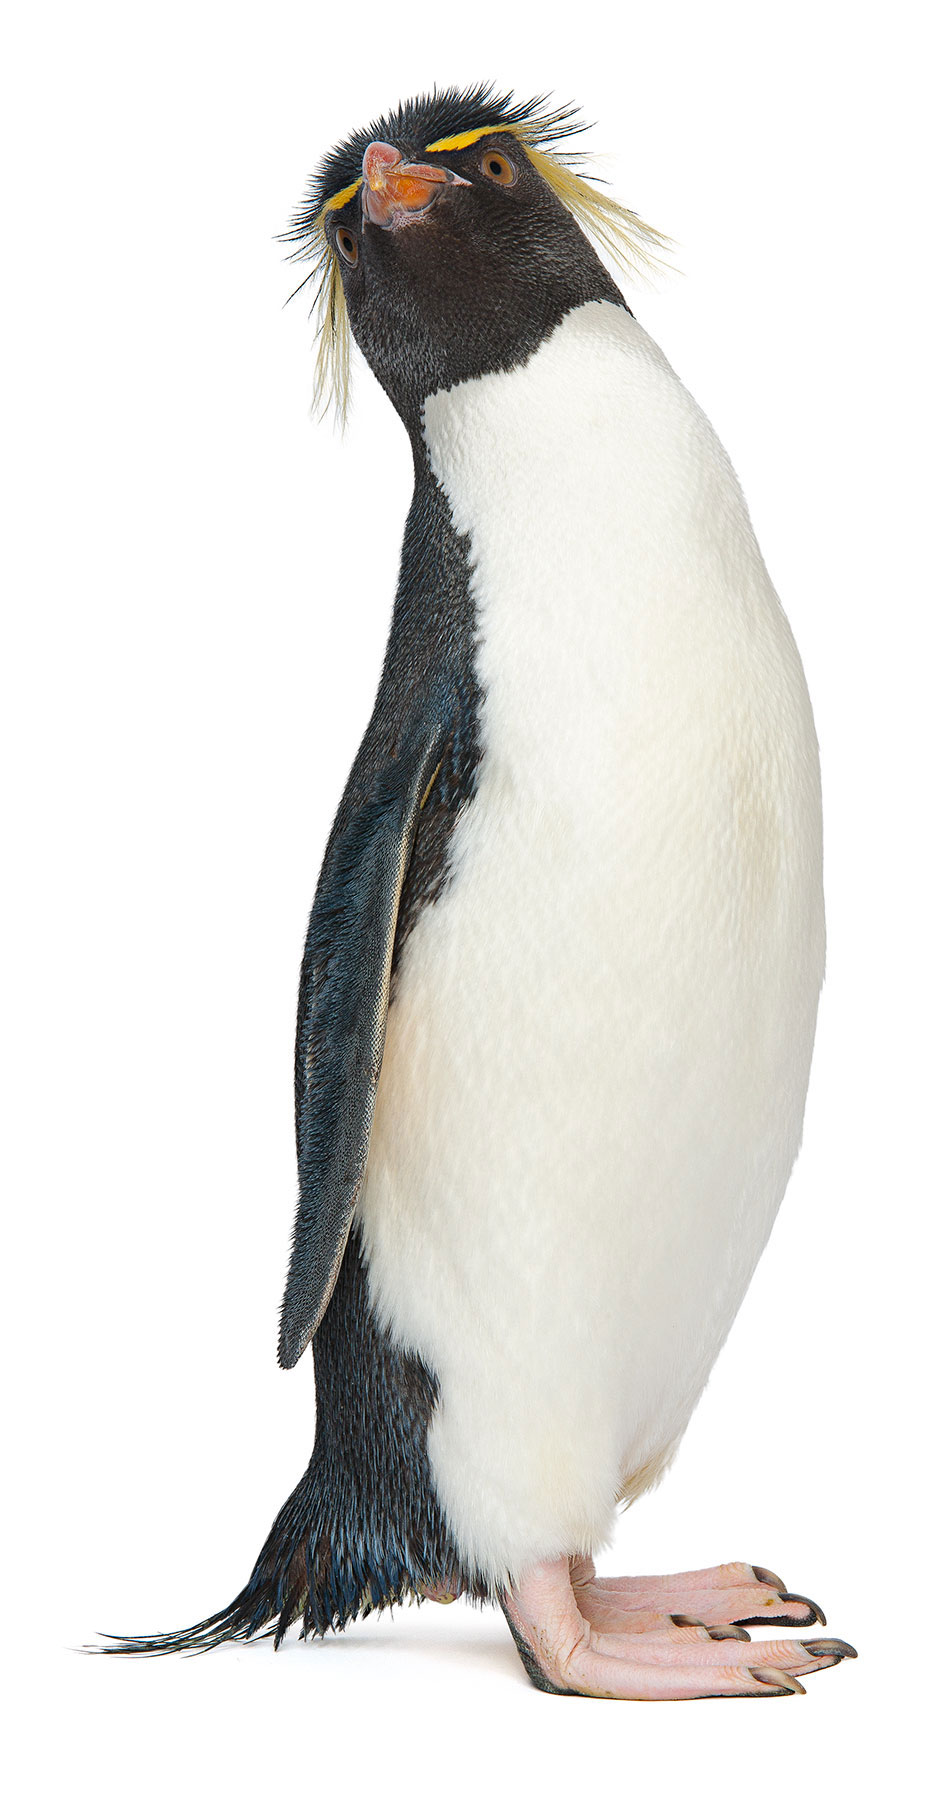  Pro Bono campaign with  Mullen Advertising  for the  New England Aquarium’s  penguin extravaganza. &nbsp;Check out the   BLOG   for some interesting tidbits and video, _________________________________________________________   